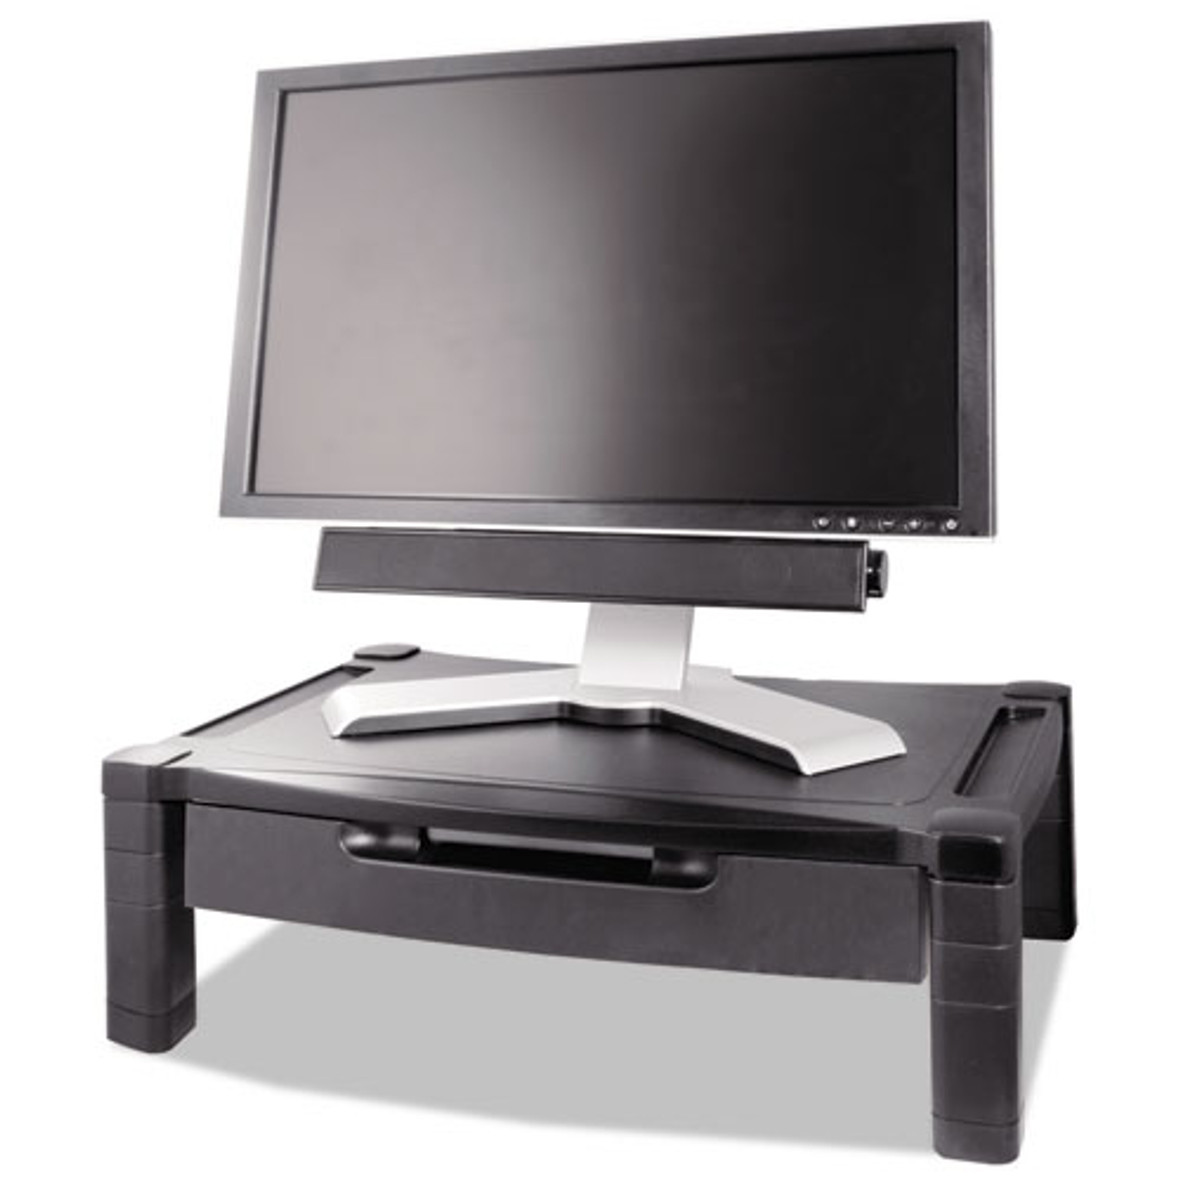 Kantek Wide Deluxe Two-Level Monitor Stand, 20" x 13.25" x 3" to 6.5", Black, Supports 50 lbs